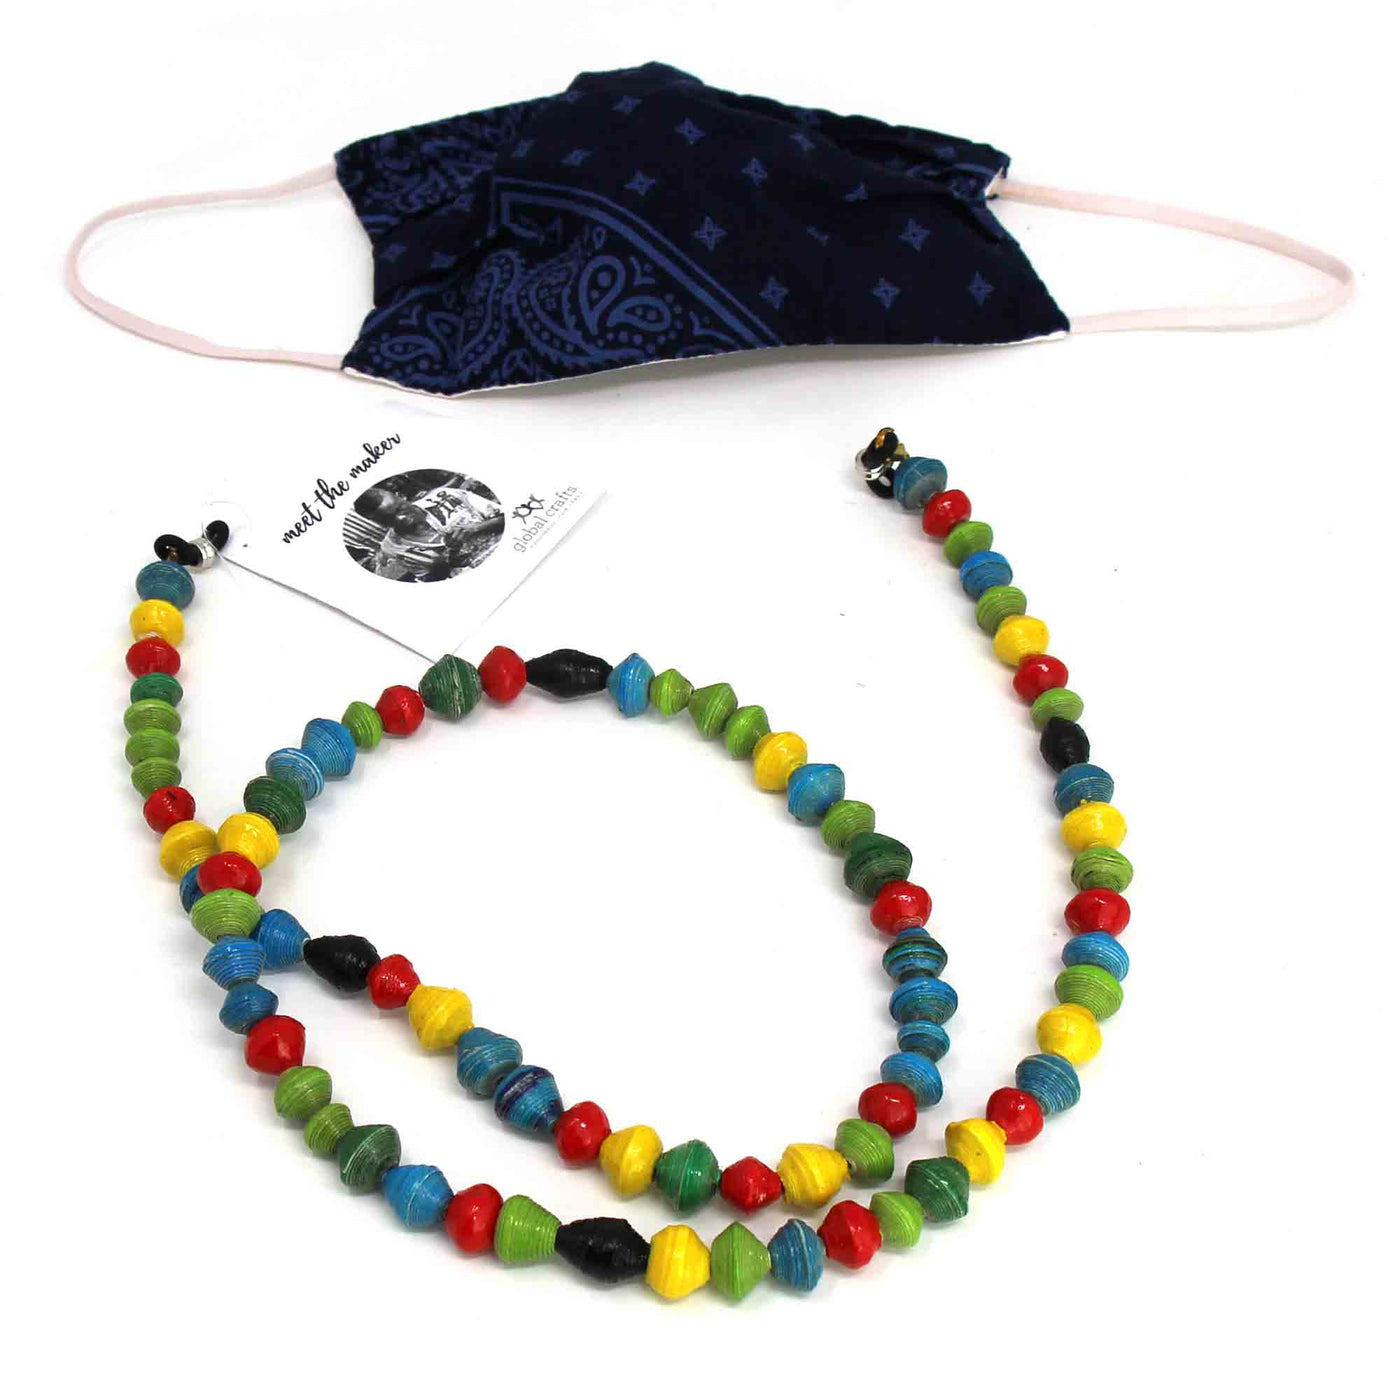 Face Mask/Eyeglass Paper Bead Chain, Colorful Round Beads - Yvonne’s 100th Wish Inc